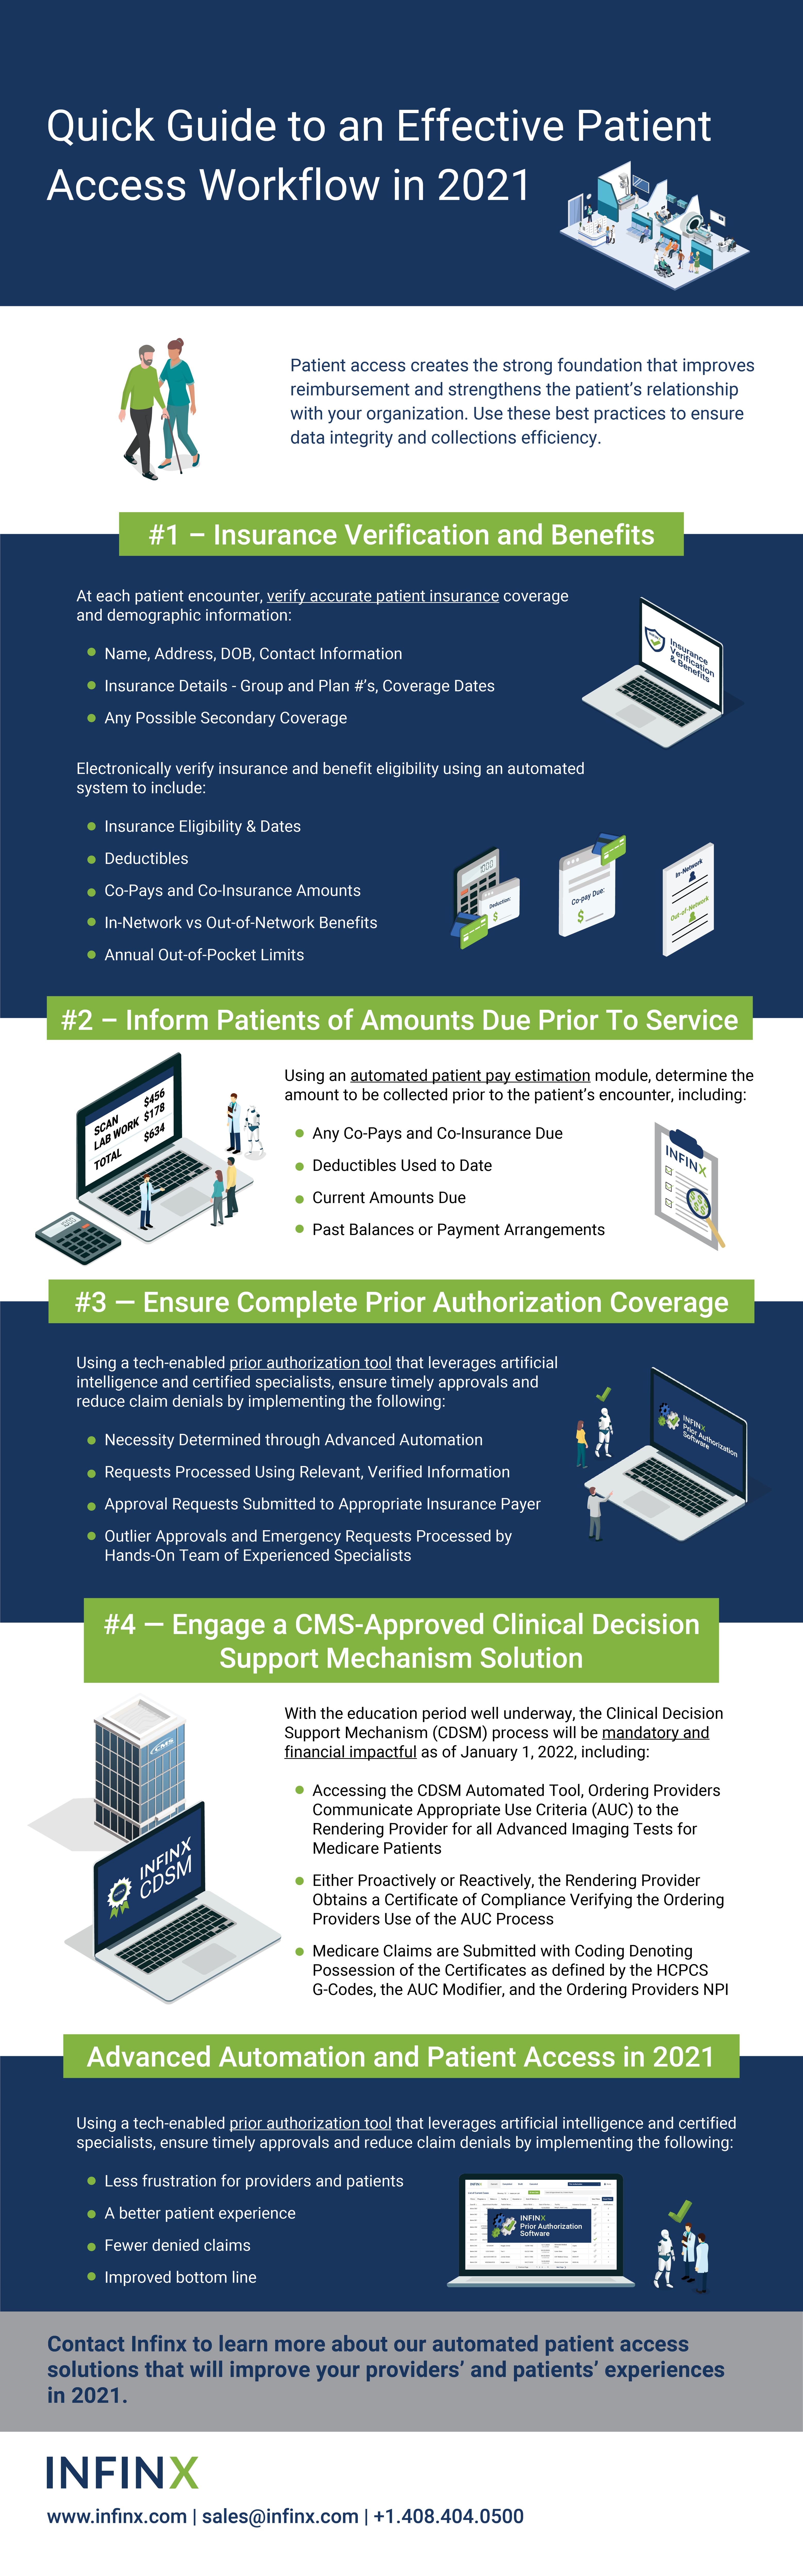 Infinx - Infographic - Quick Guide to an Effective Patient Access Workflow in 2021- Jan2021 RGB